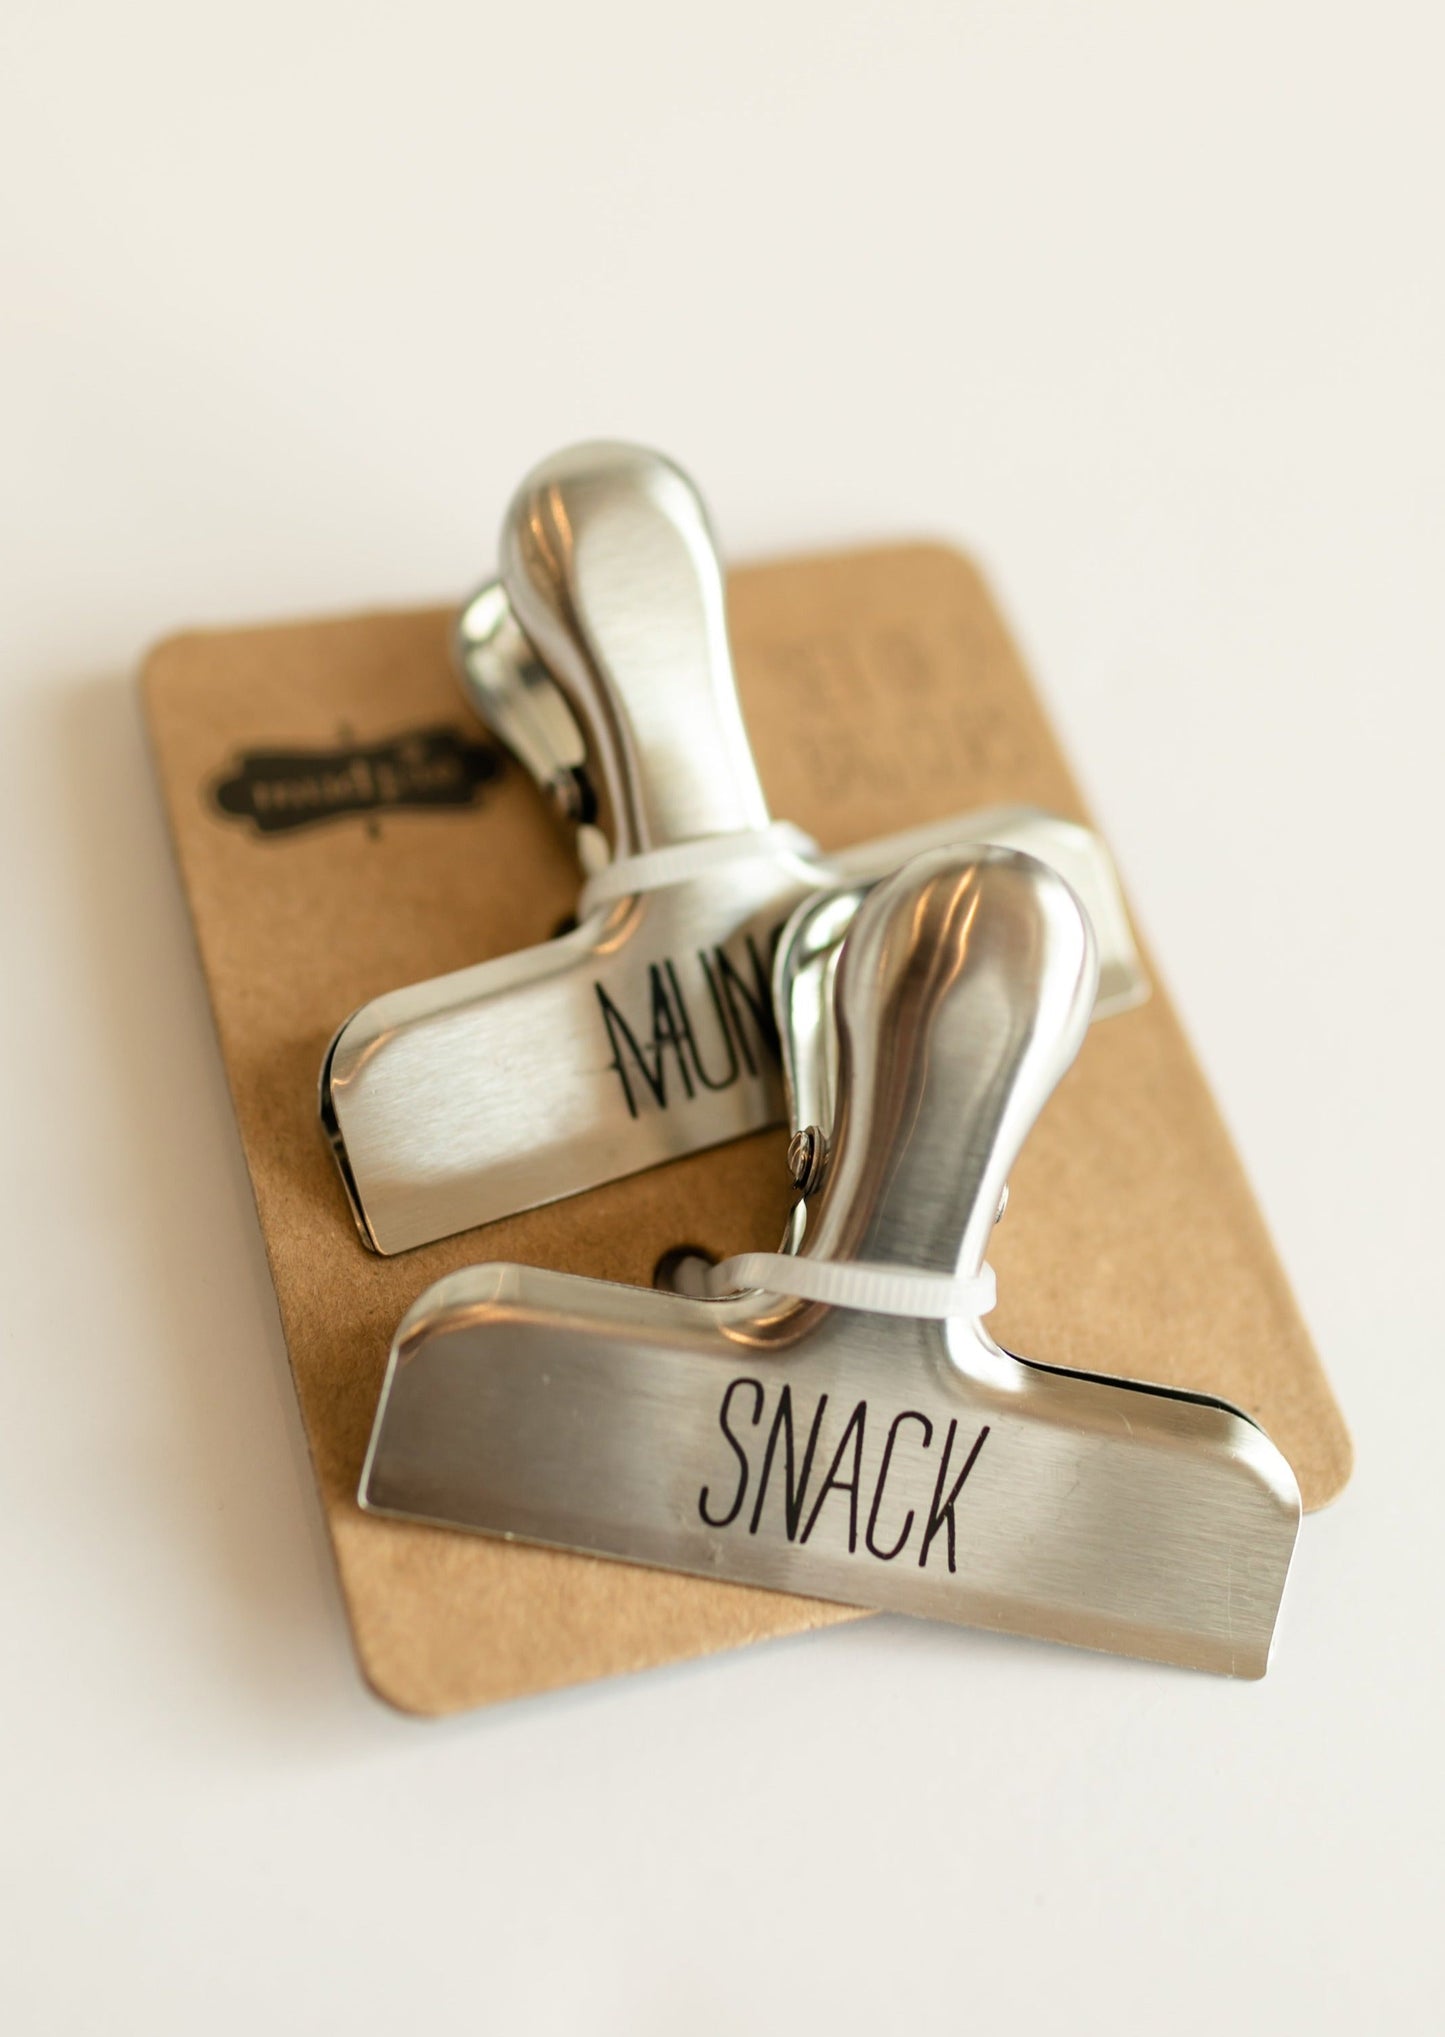 Bistro Bag Chip Clips Home & Lifestyle Snack